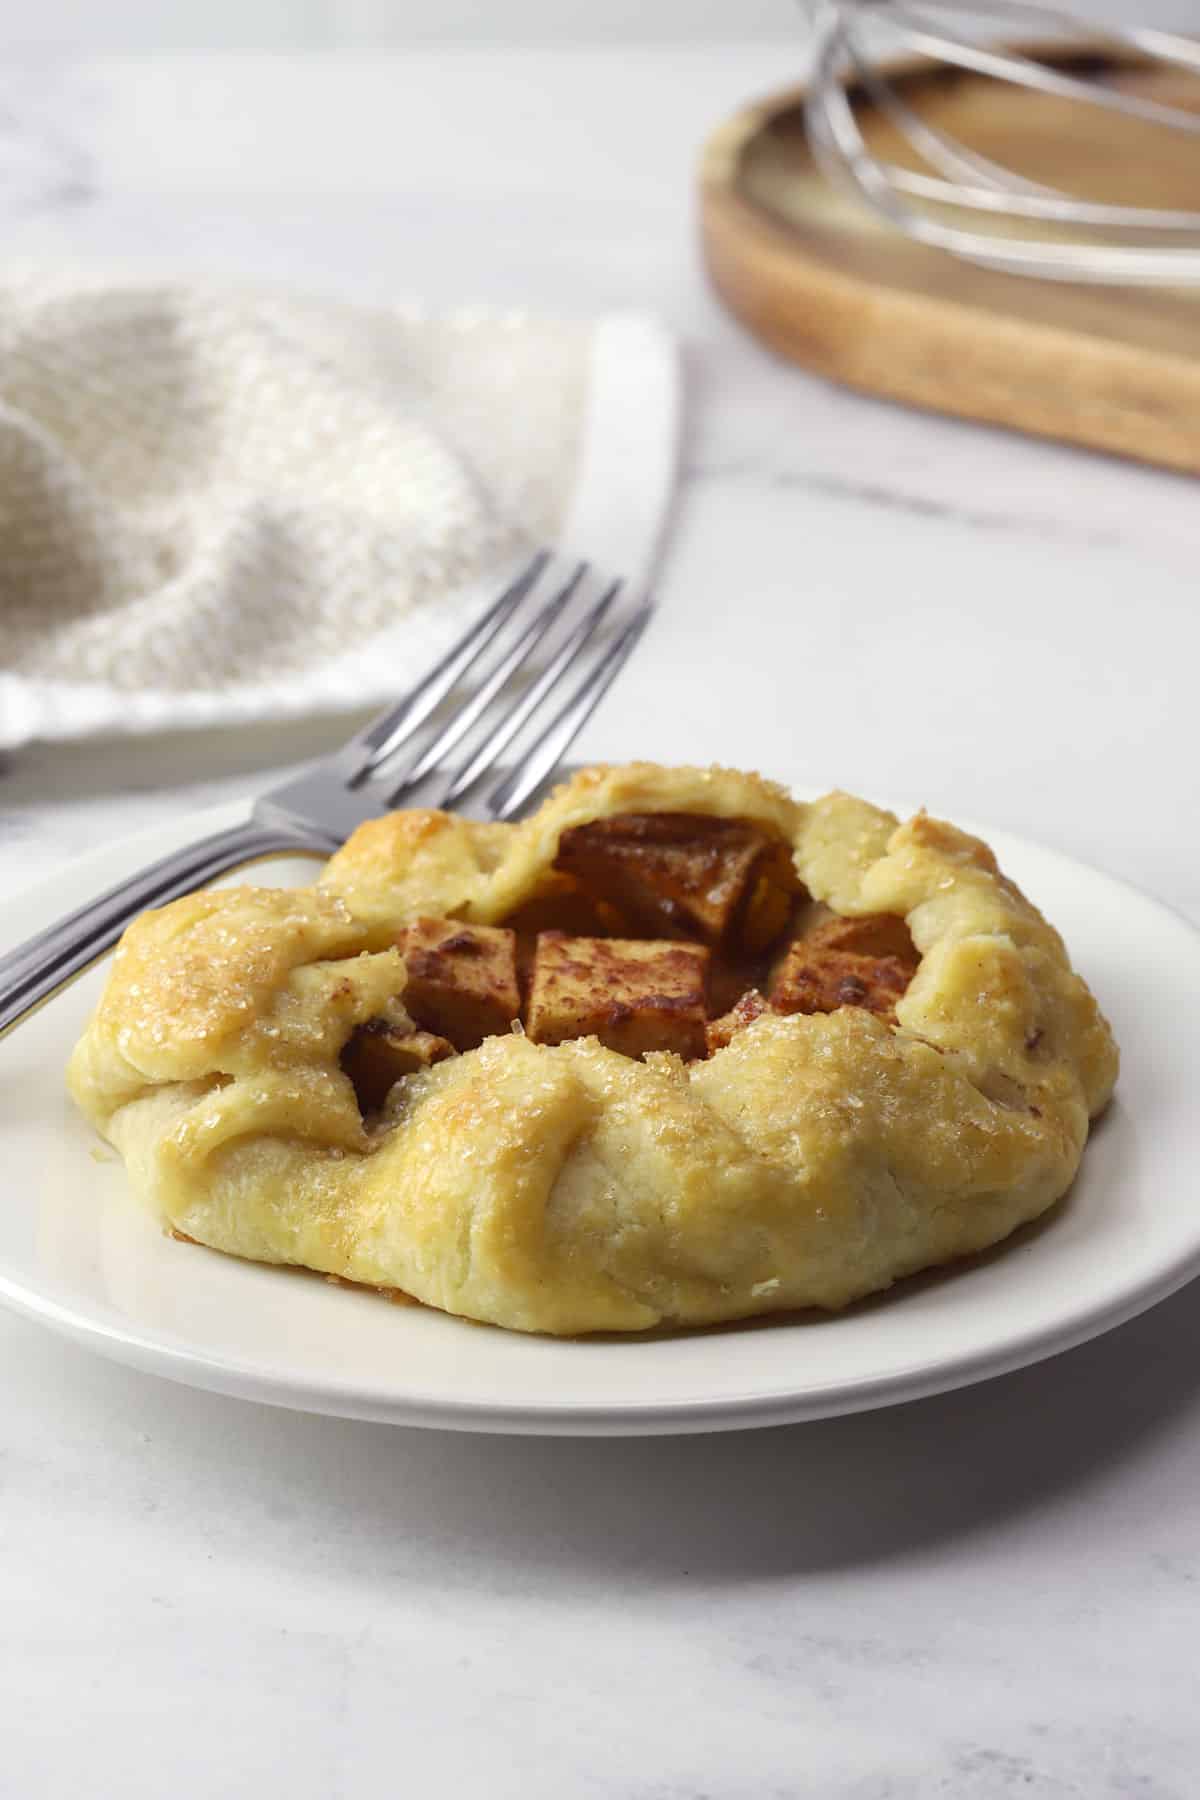 One mini apple galette on a plate with a fork.